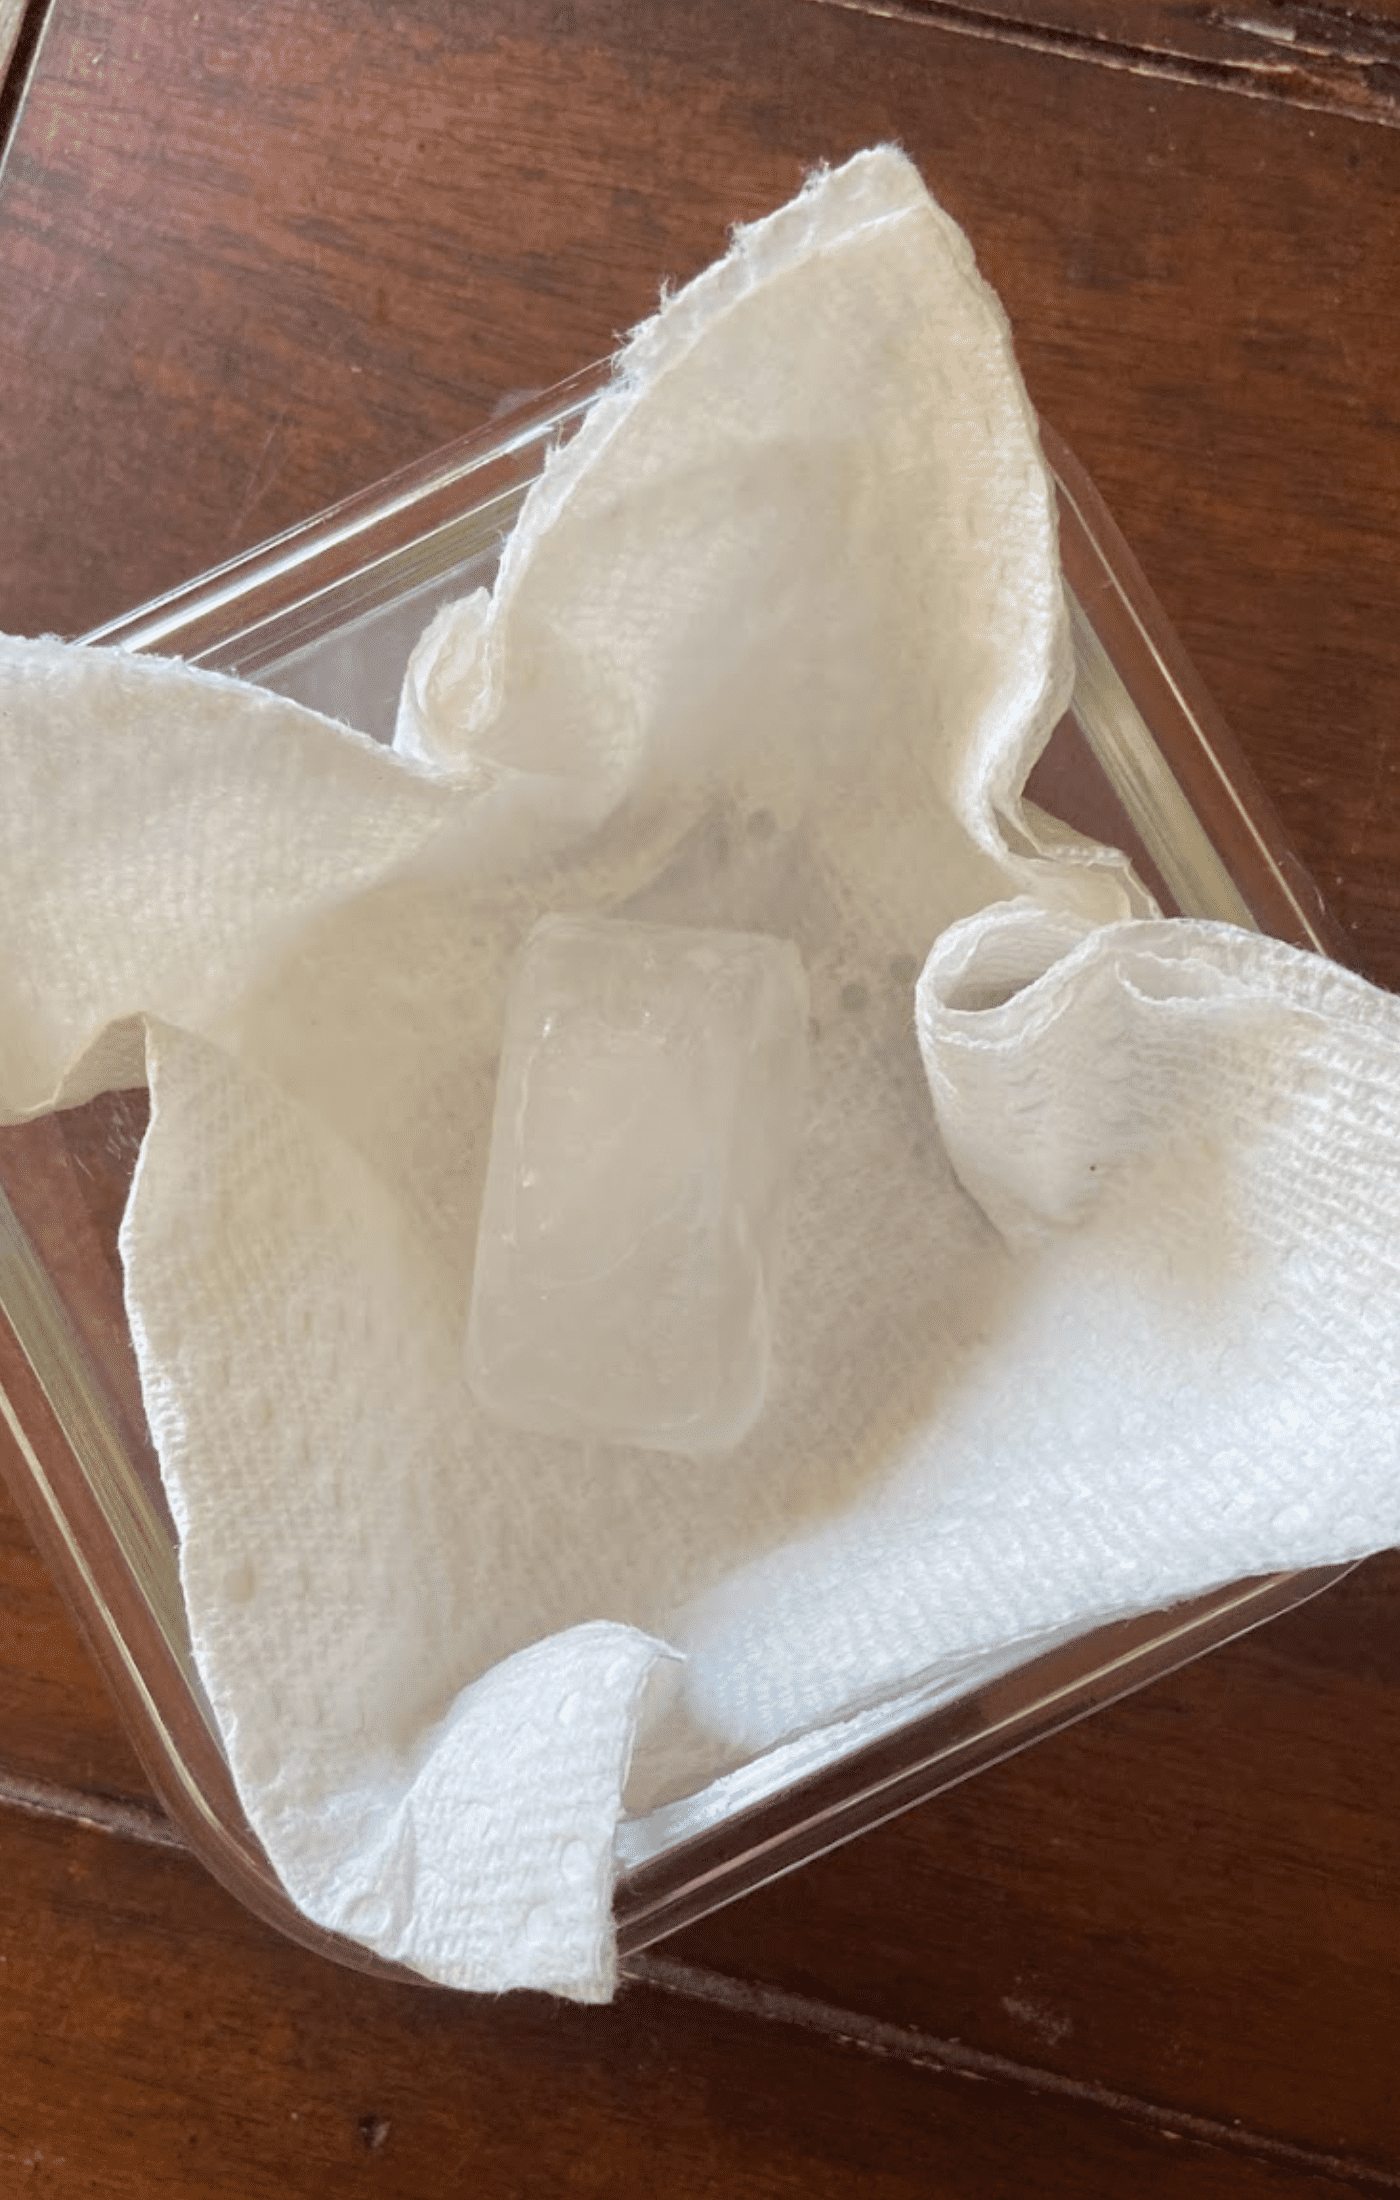 ice insulation experiment with paper towel 1 1